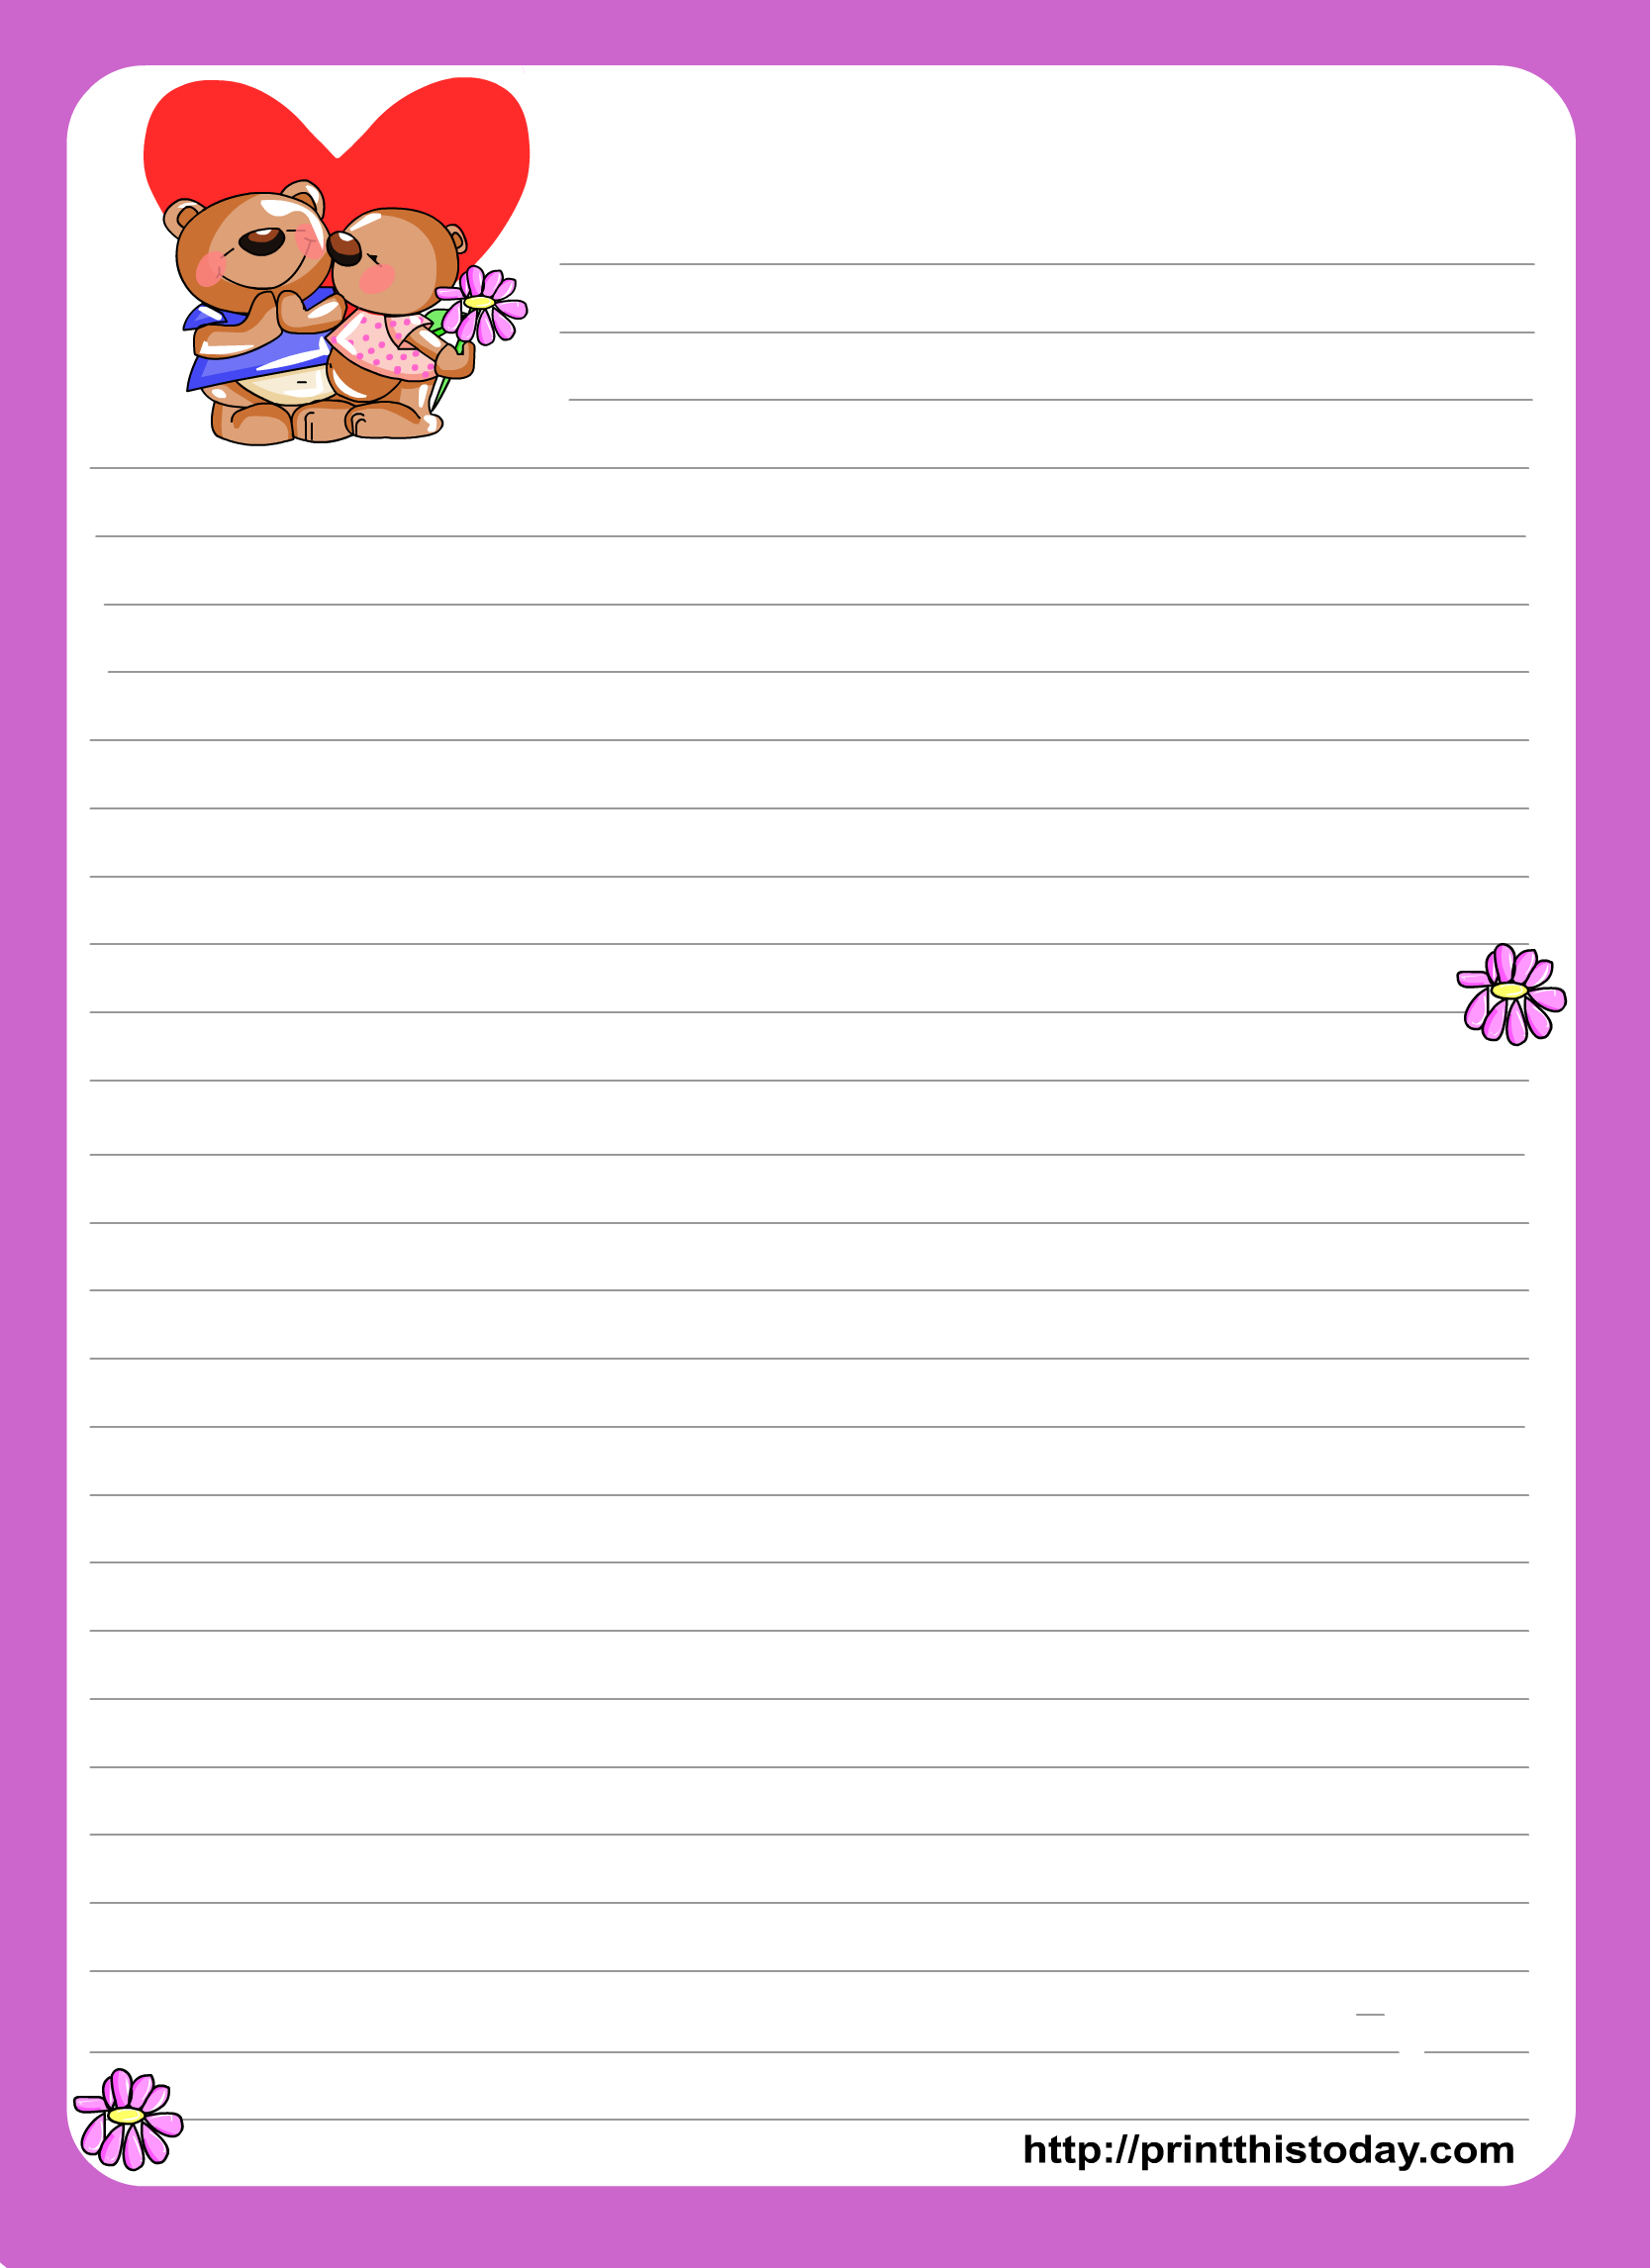 Love Letter Writing Paper - Free Printable Stationery Writing Paper